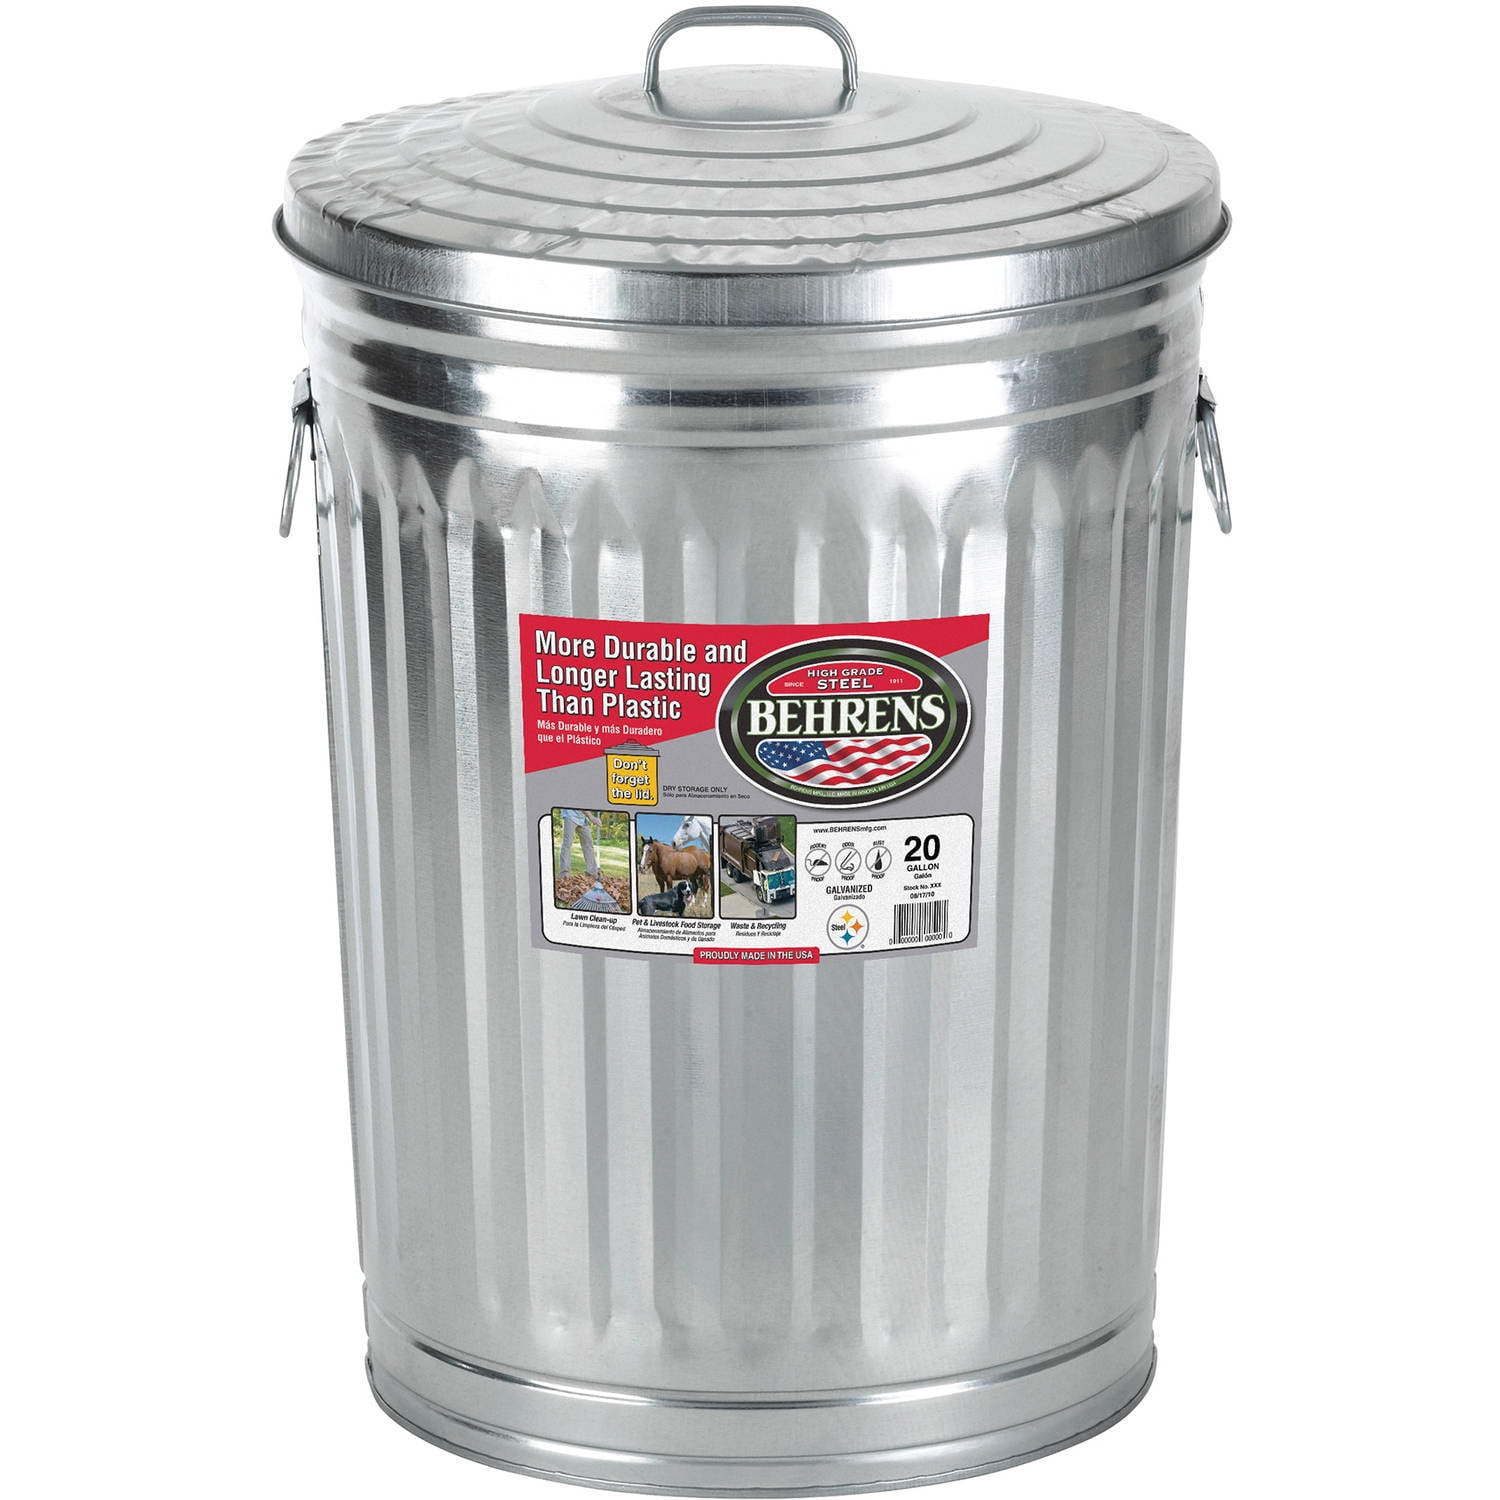 Pre-Galvanized Trash Can with Lid, Round, Steel, 20gal, Gray, Sold as 1 Each